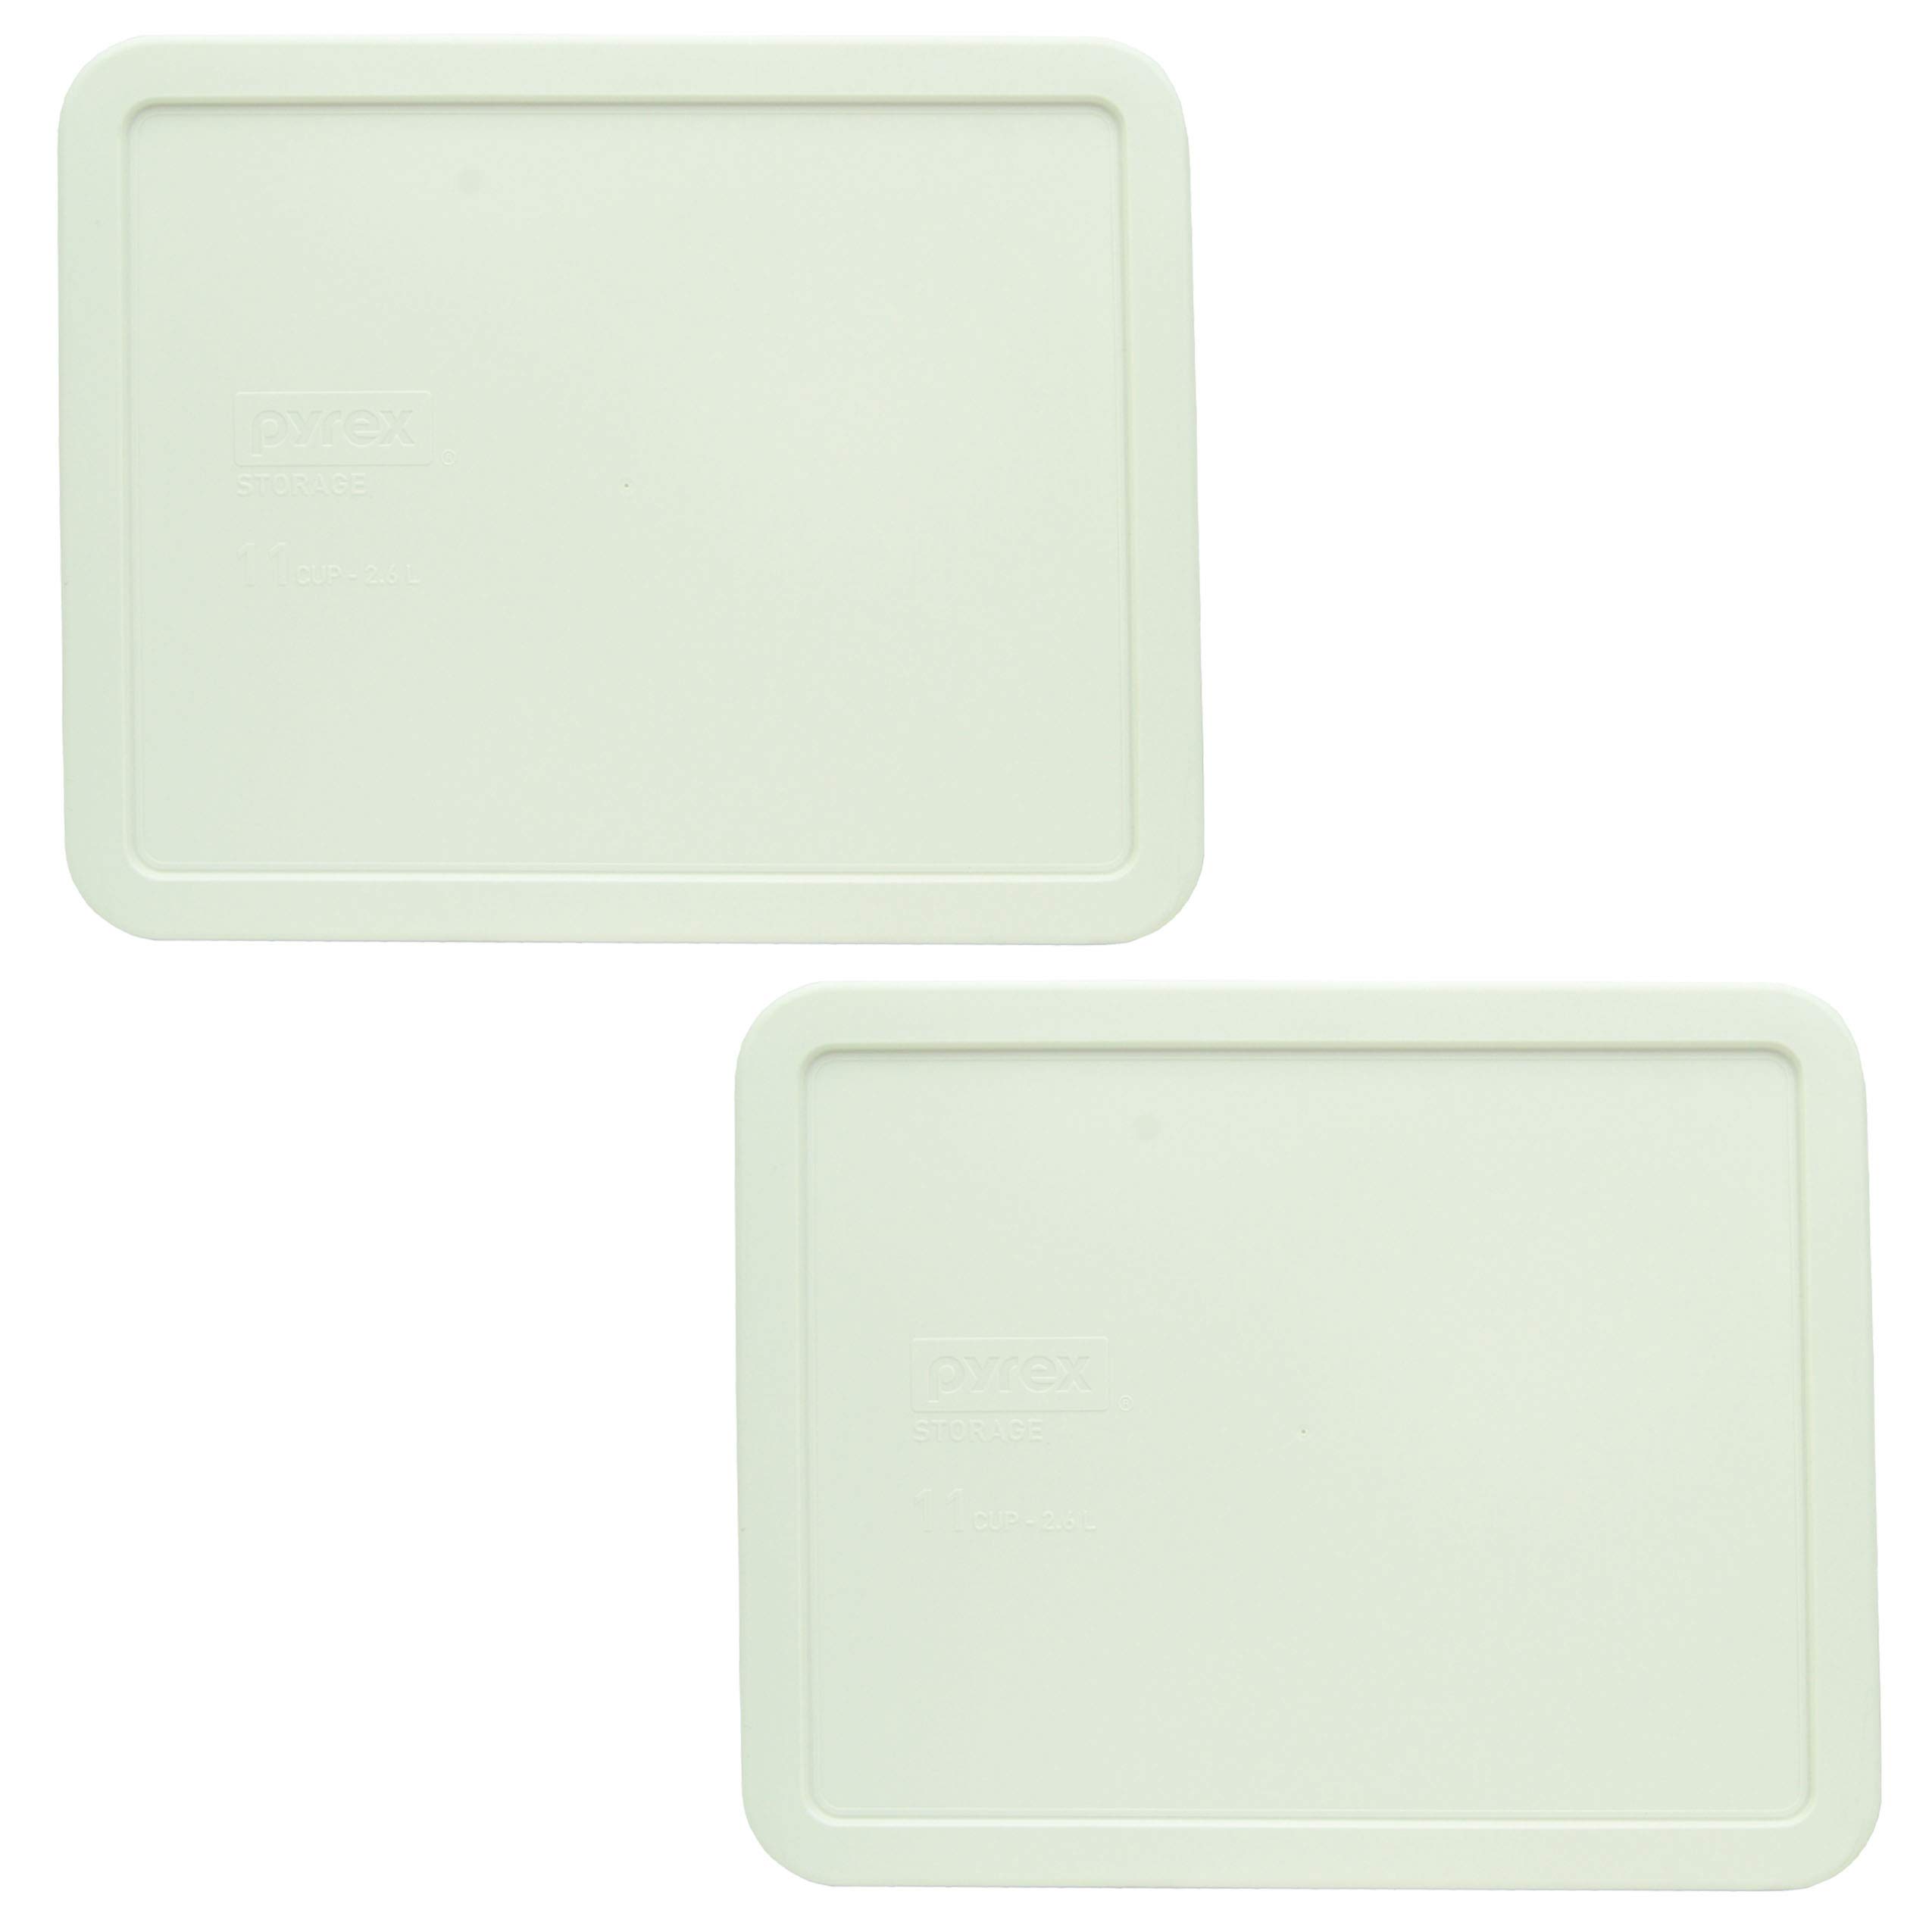 Pyrex 7212-PC White Plastic Rectangle Replacement Storage Lid, Made in USA - 2 Pack